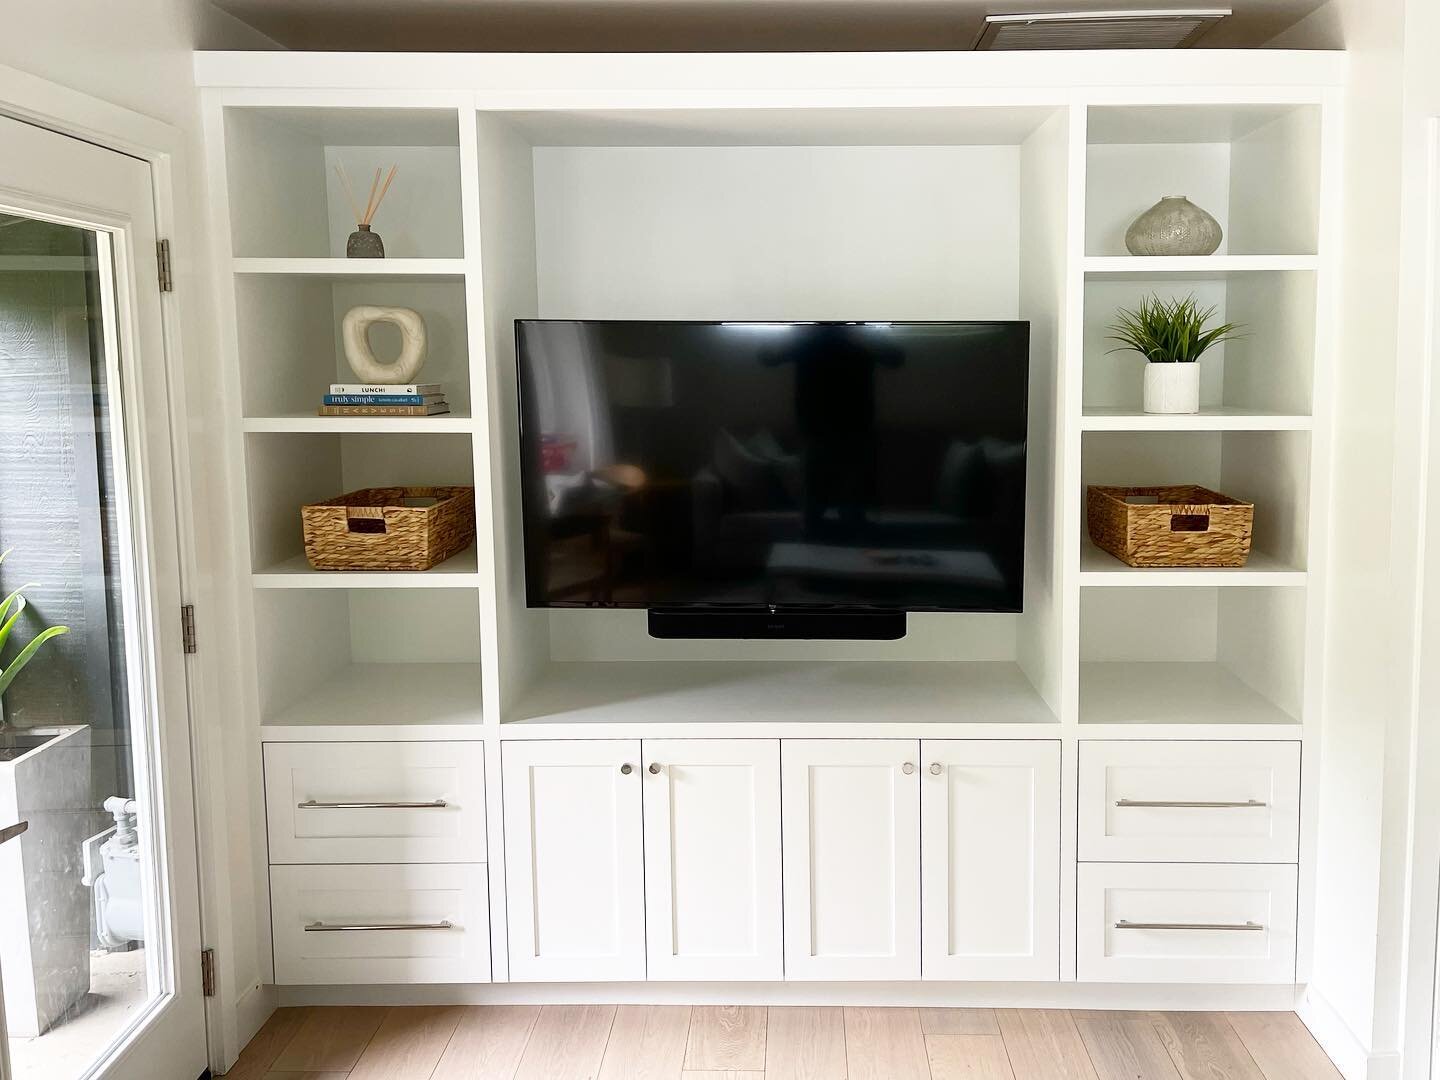 Upgraded this entertainment space with a beautiful built in #customcarpentry #customcabinetry #builtins #entertainmentspace #entertainmentcenter #santabarbara